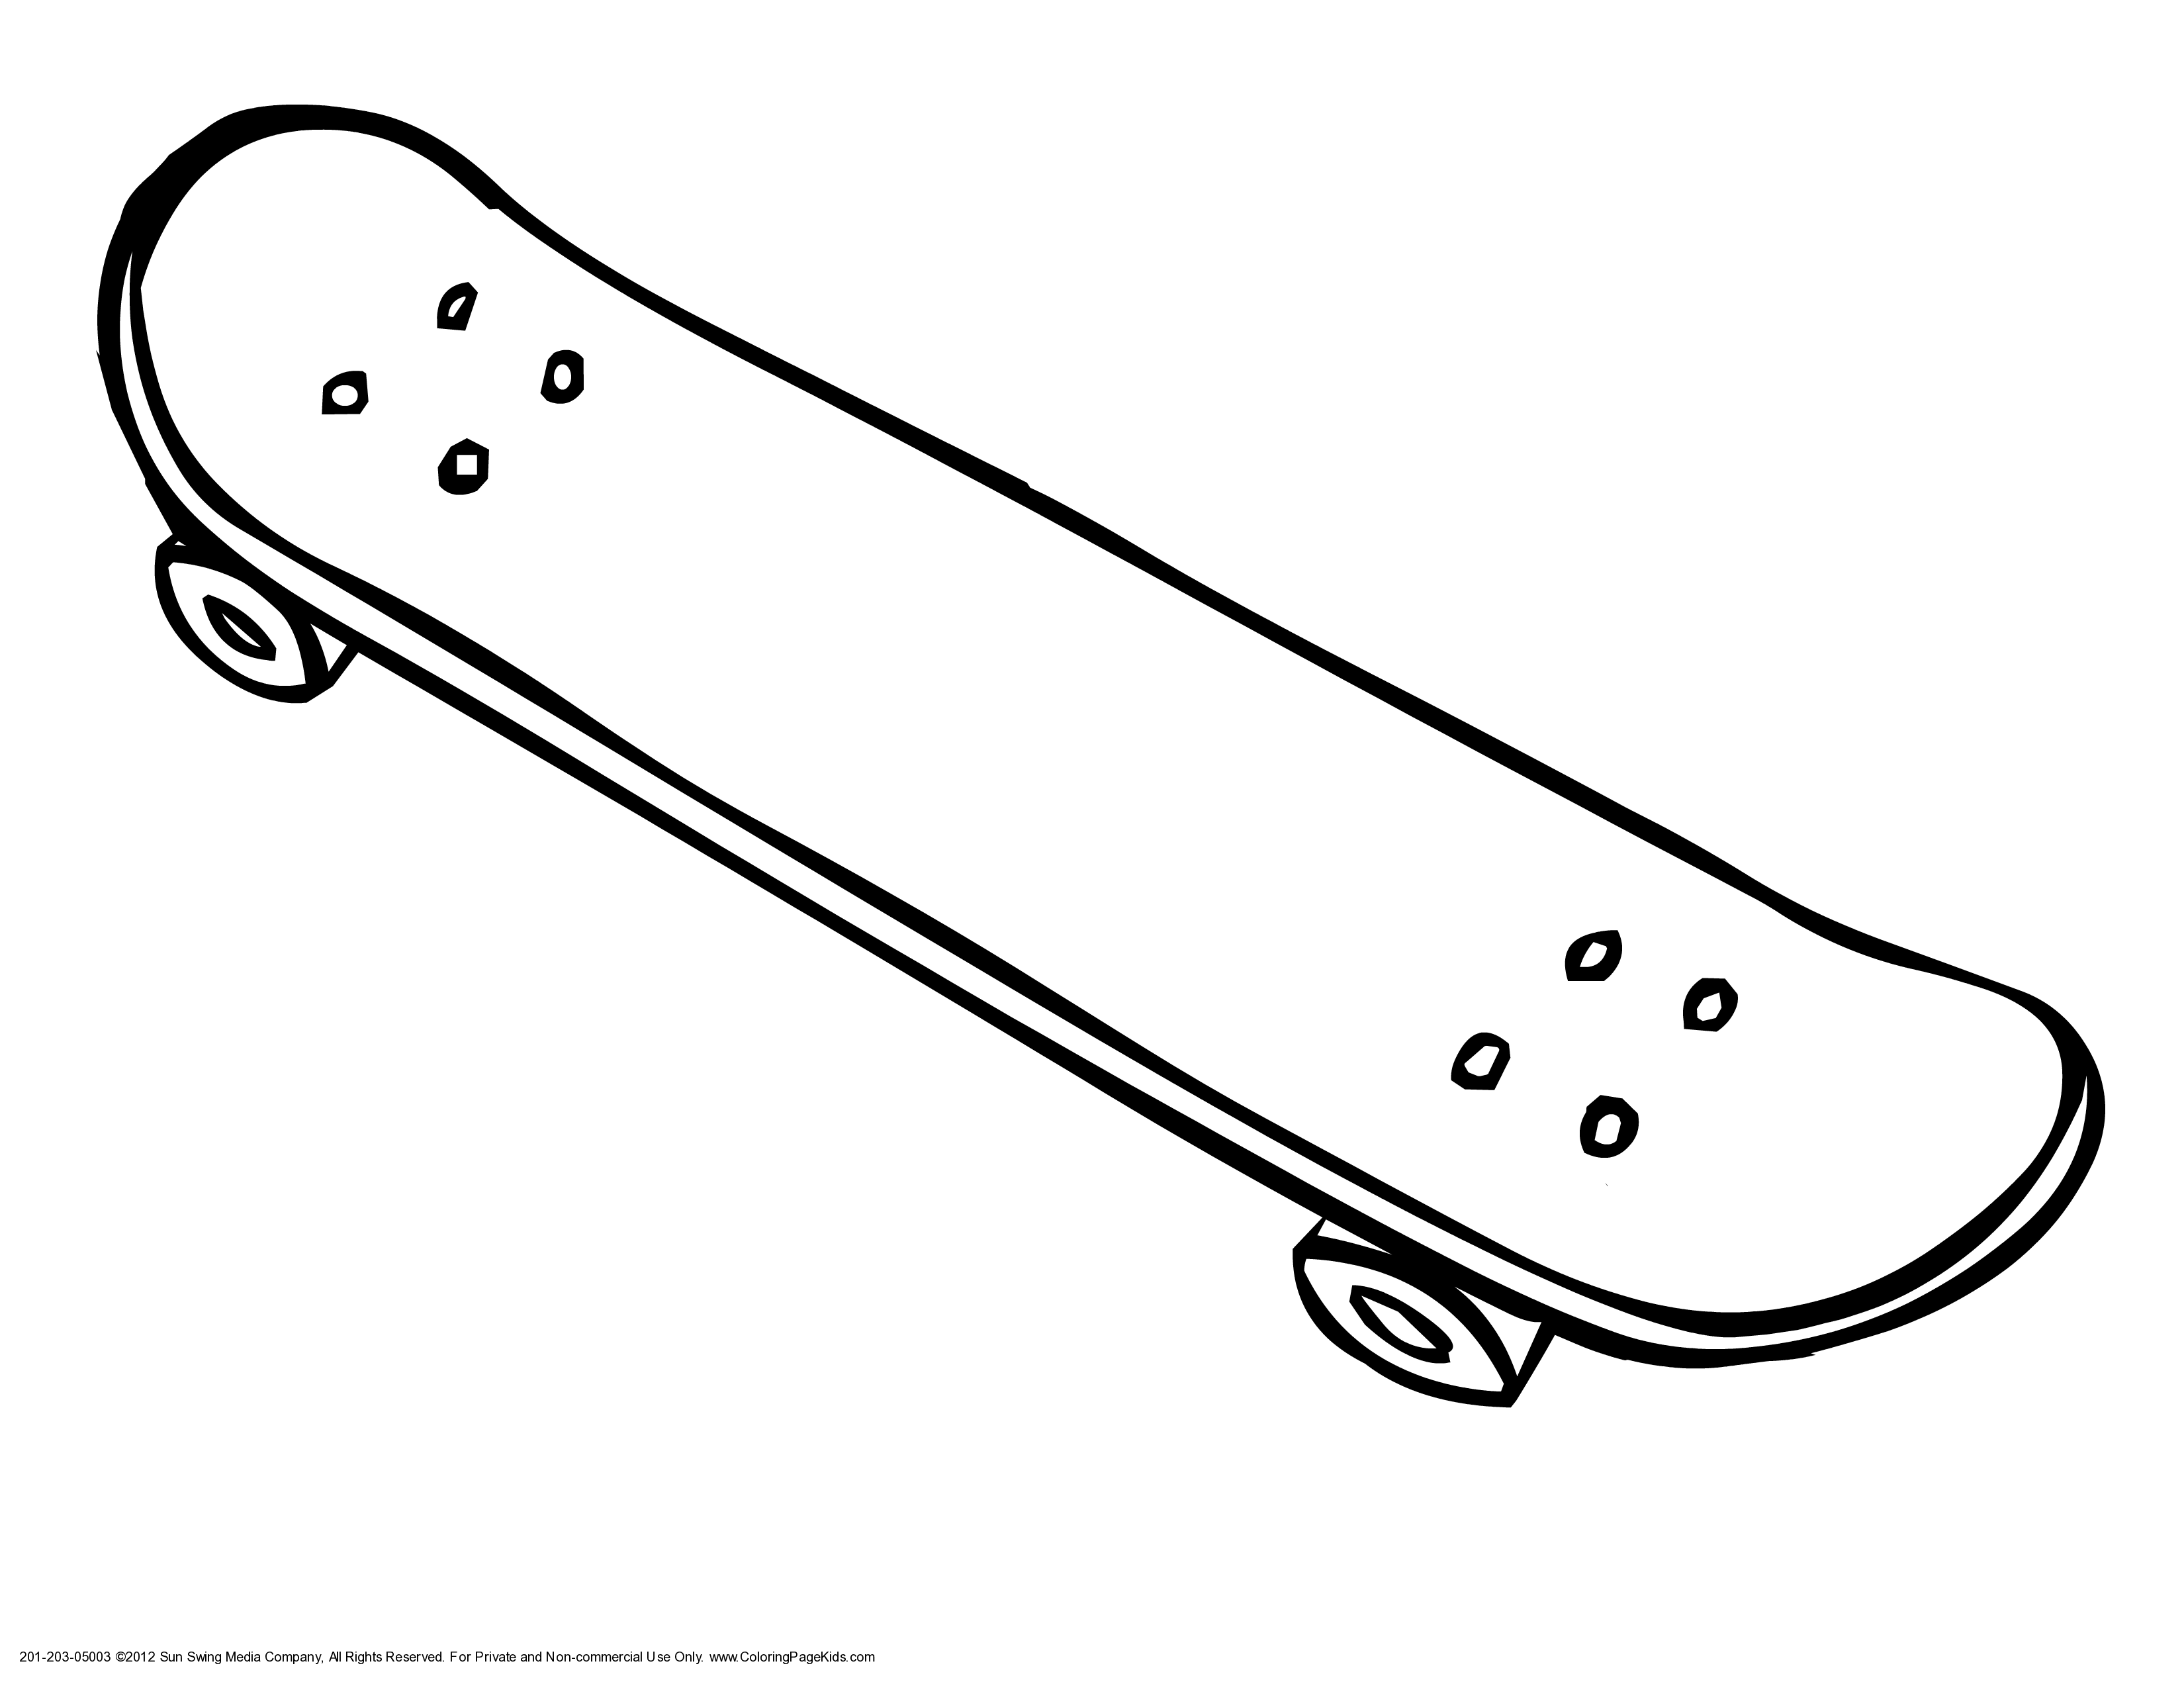 Skateboard clipart free clipart images image 3